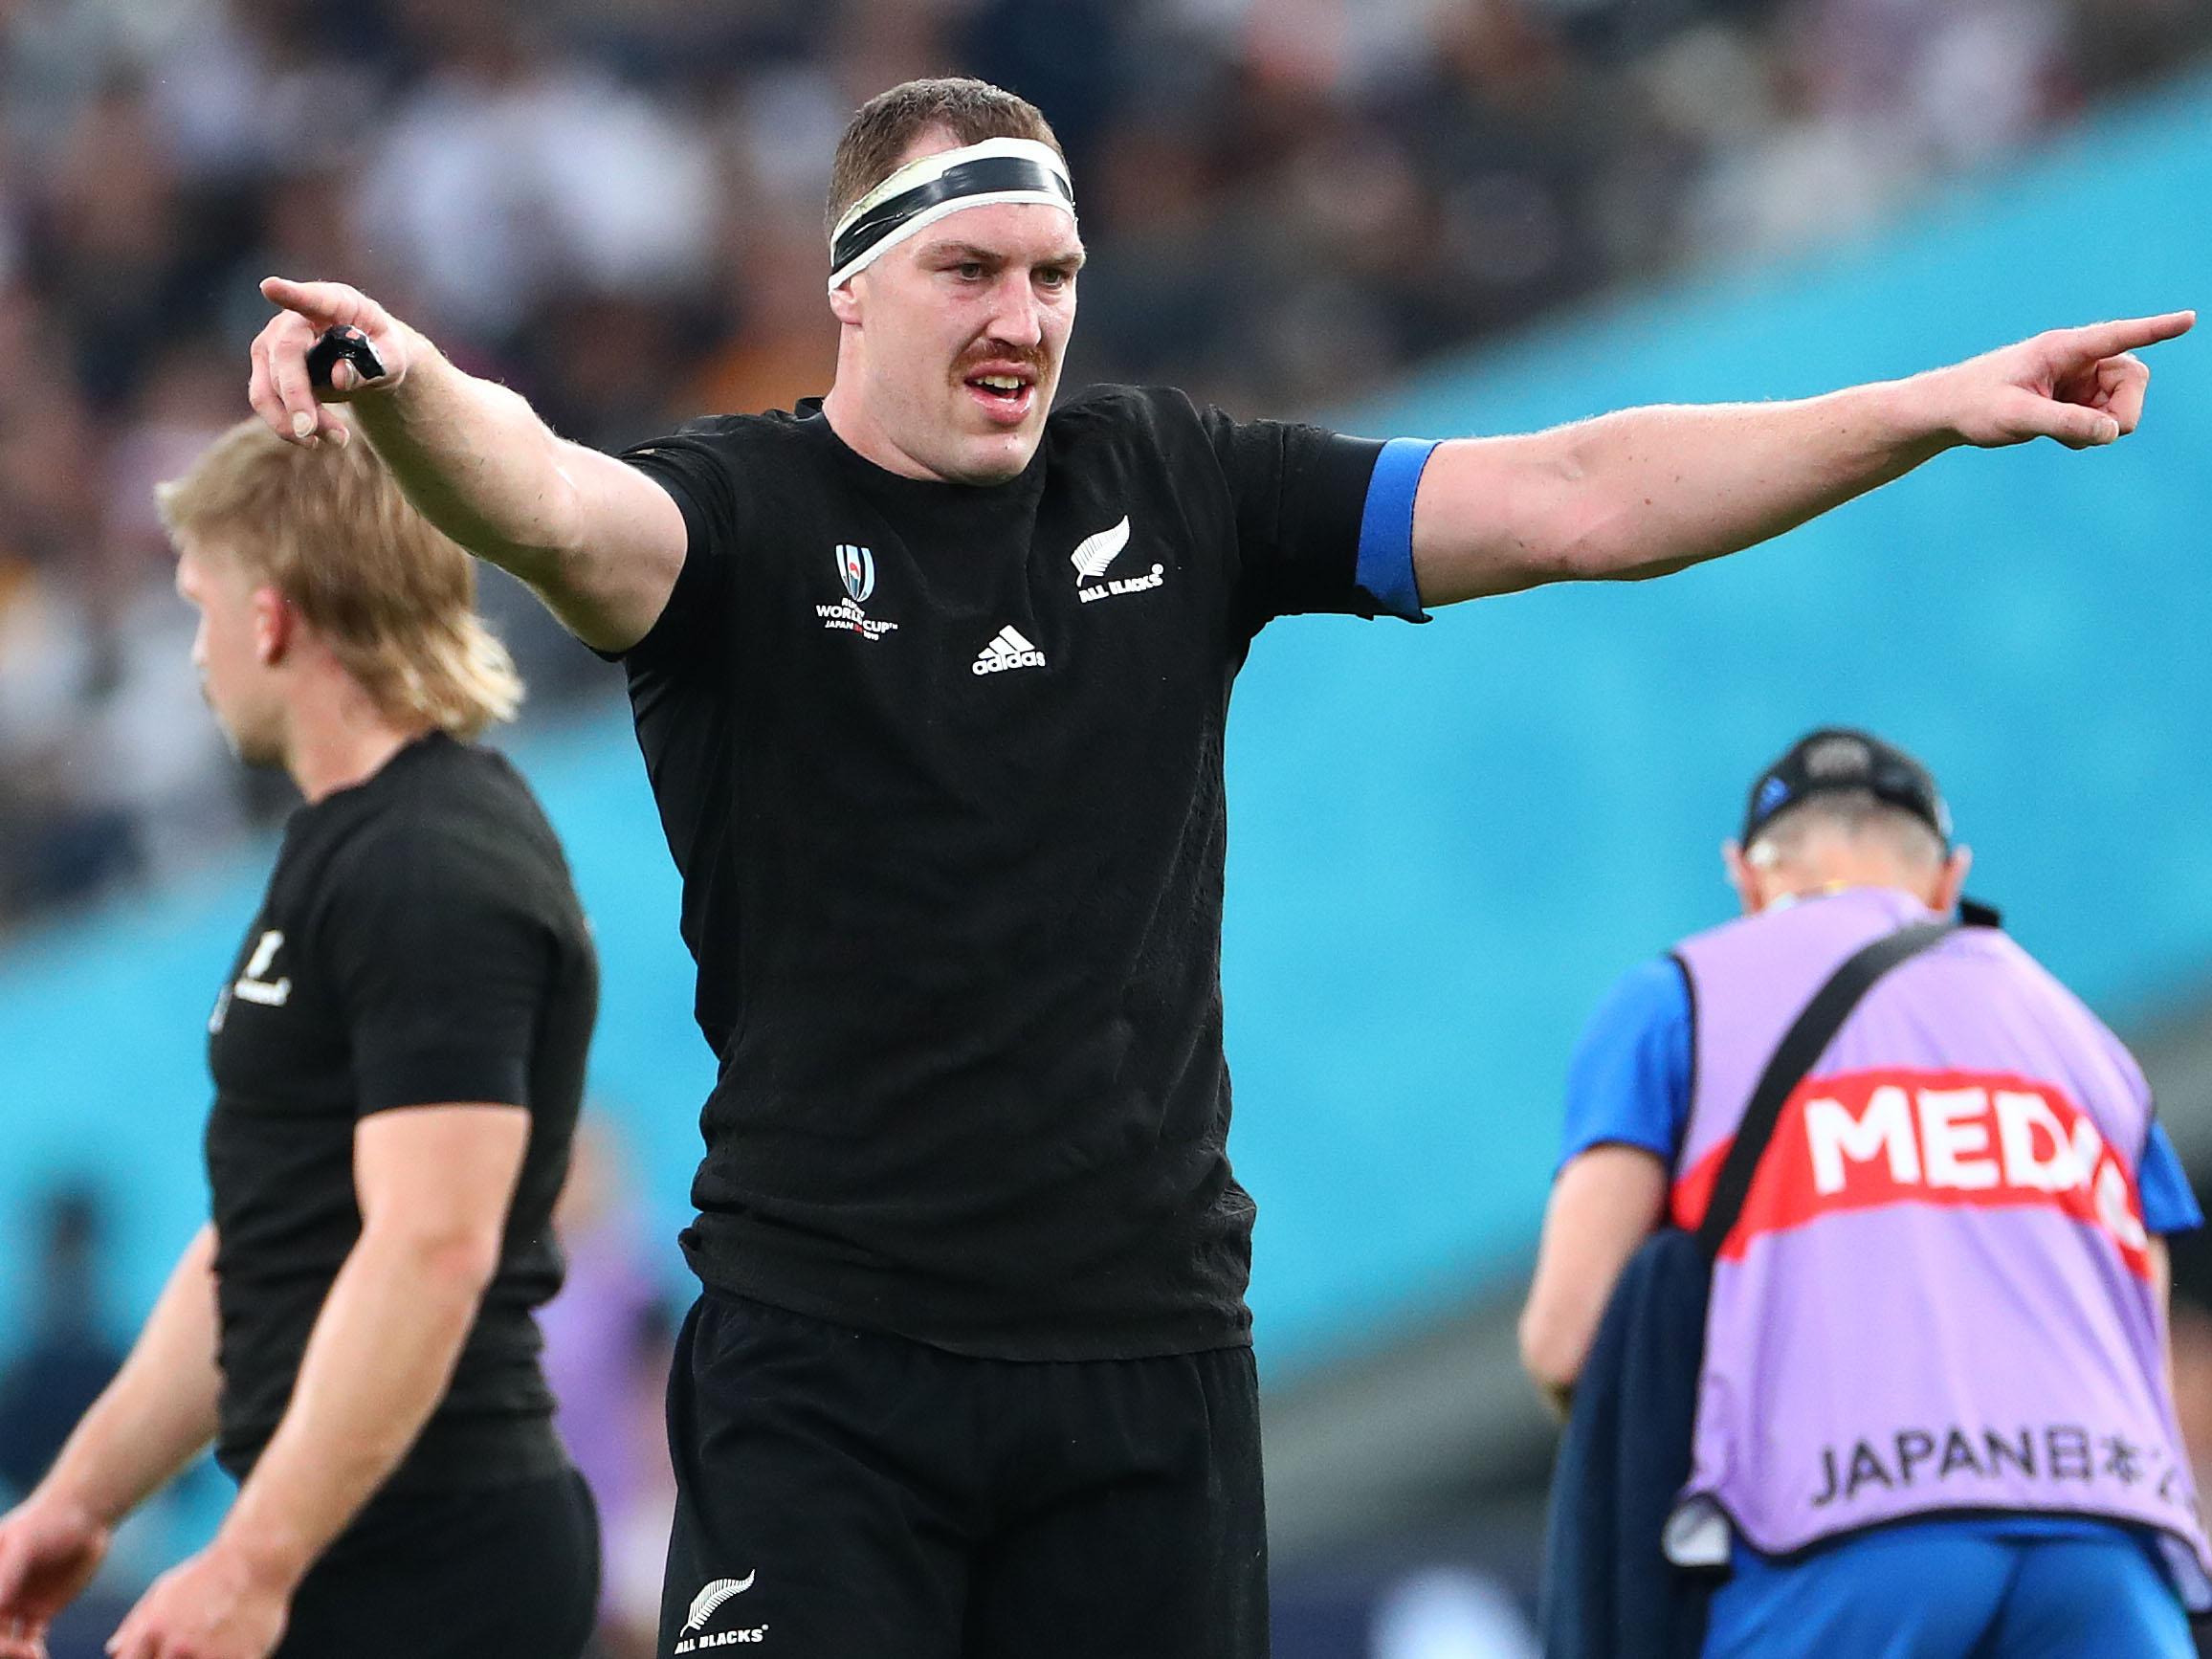 Retallick bristled this week when reminded of his 2014 comments